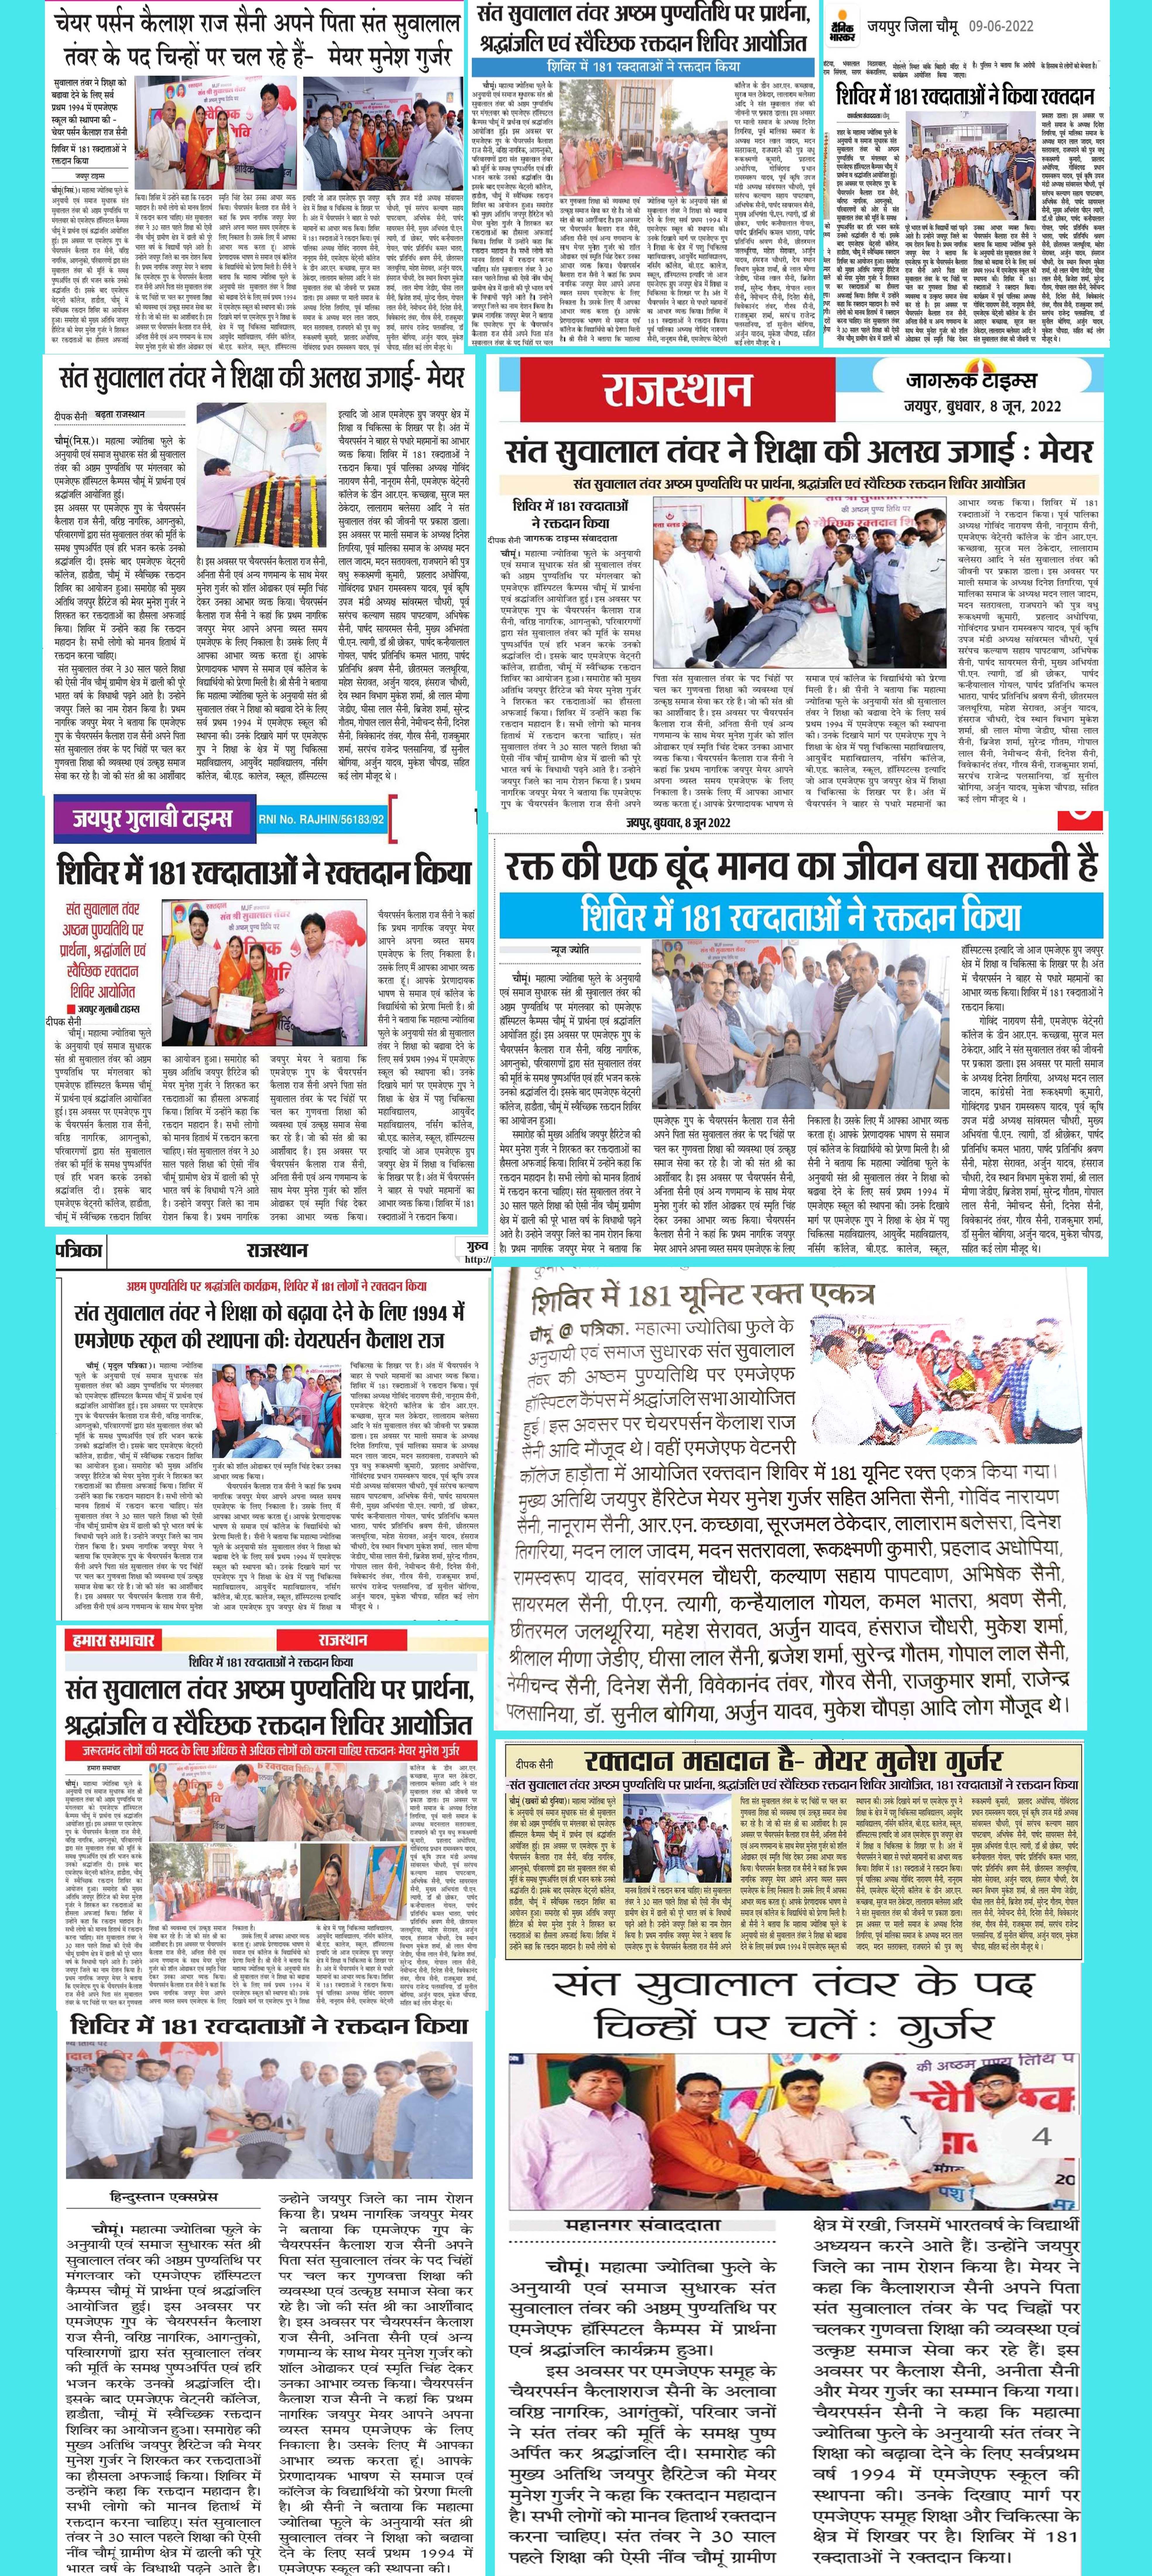 Glimpses of newspapers headlines about floral Ceremony